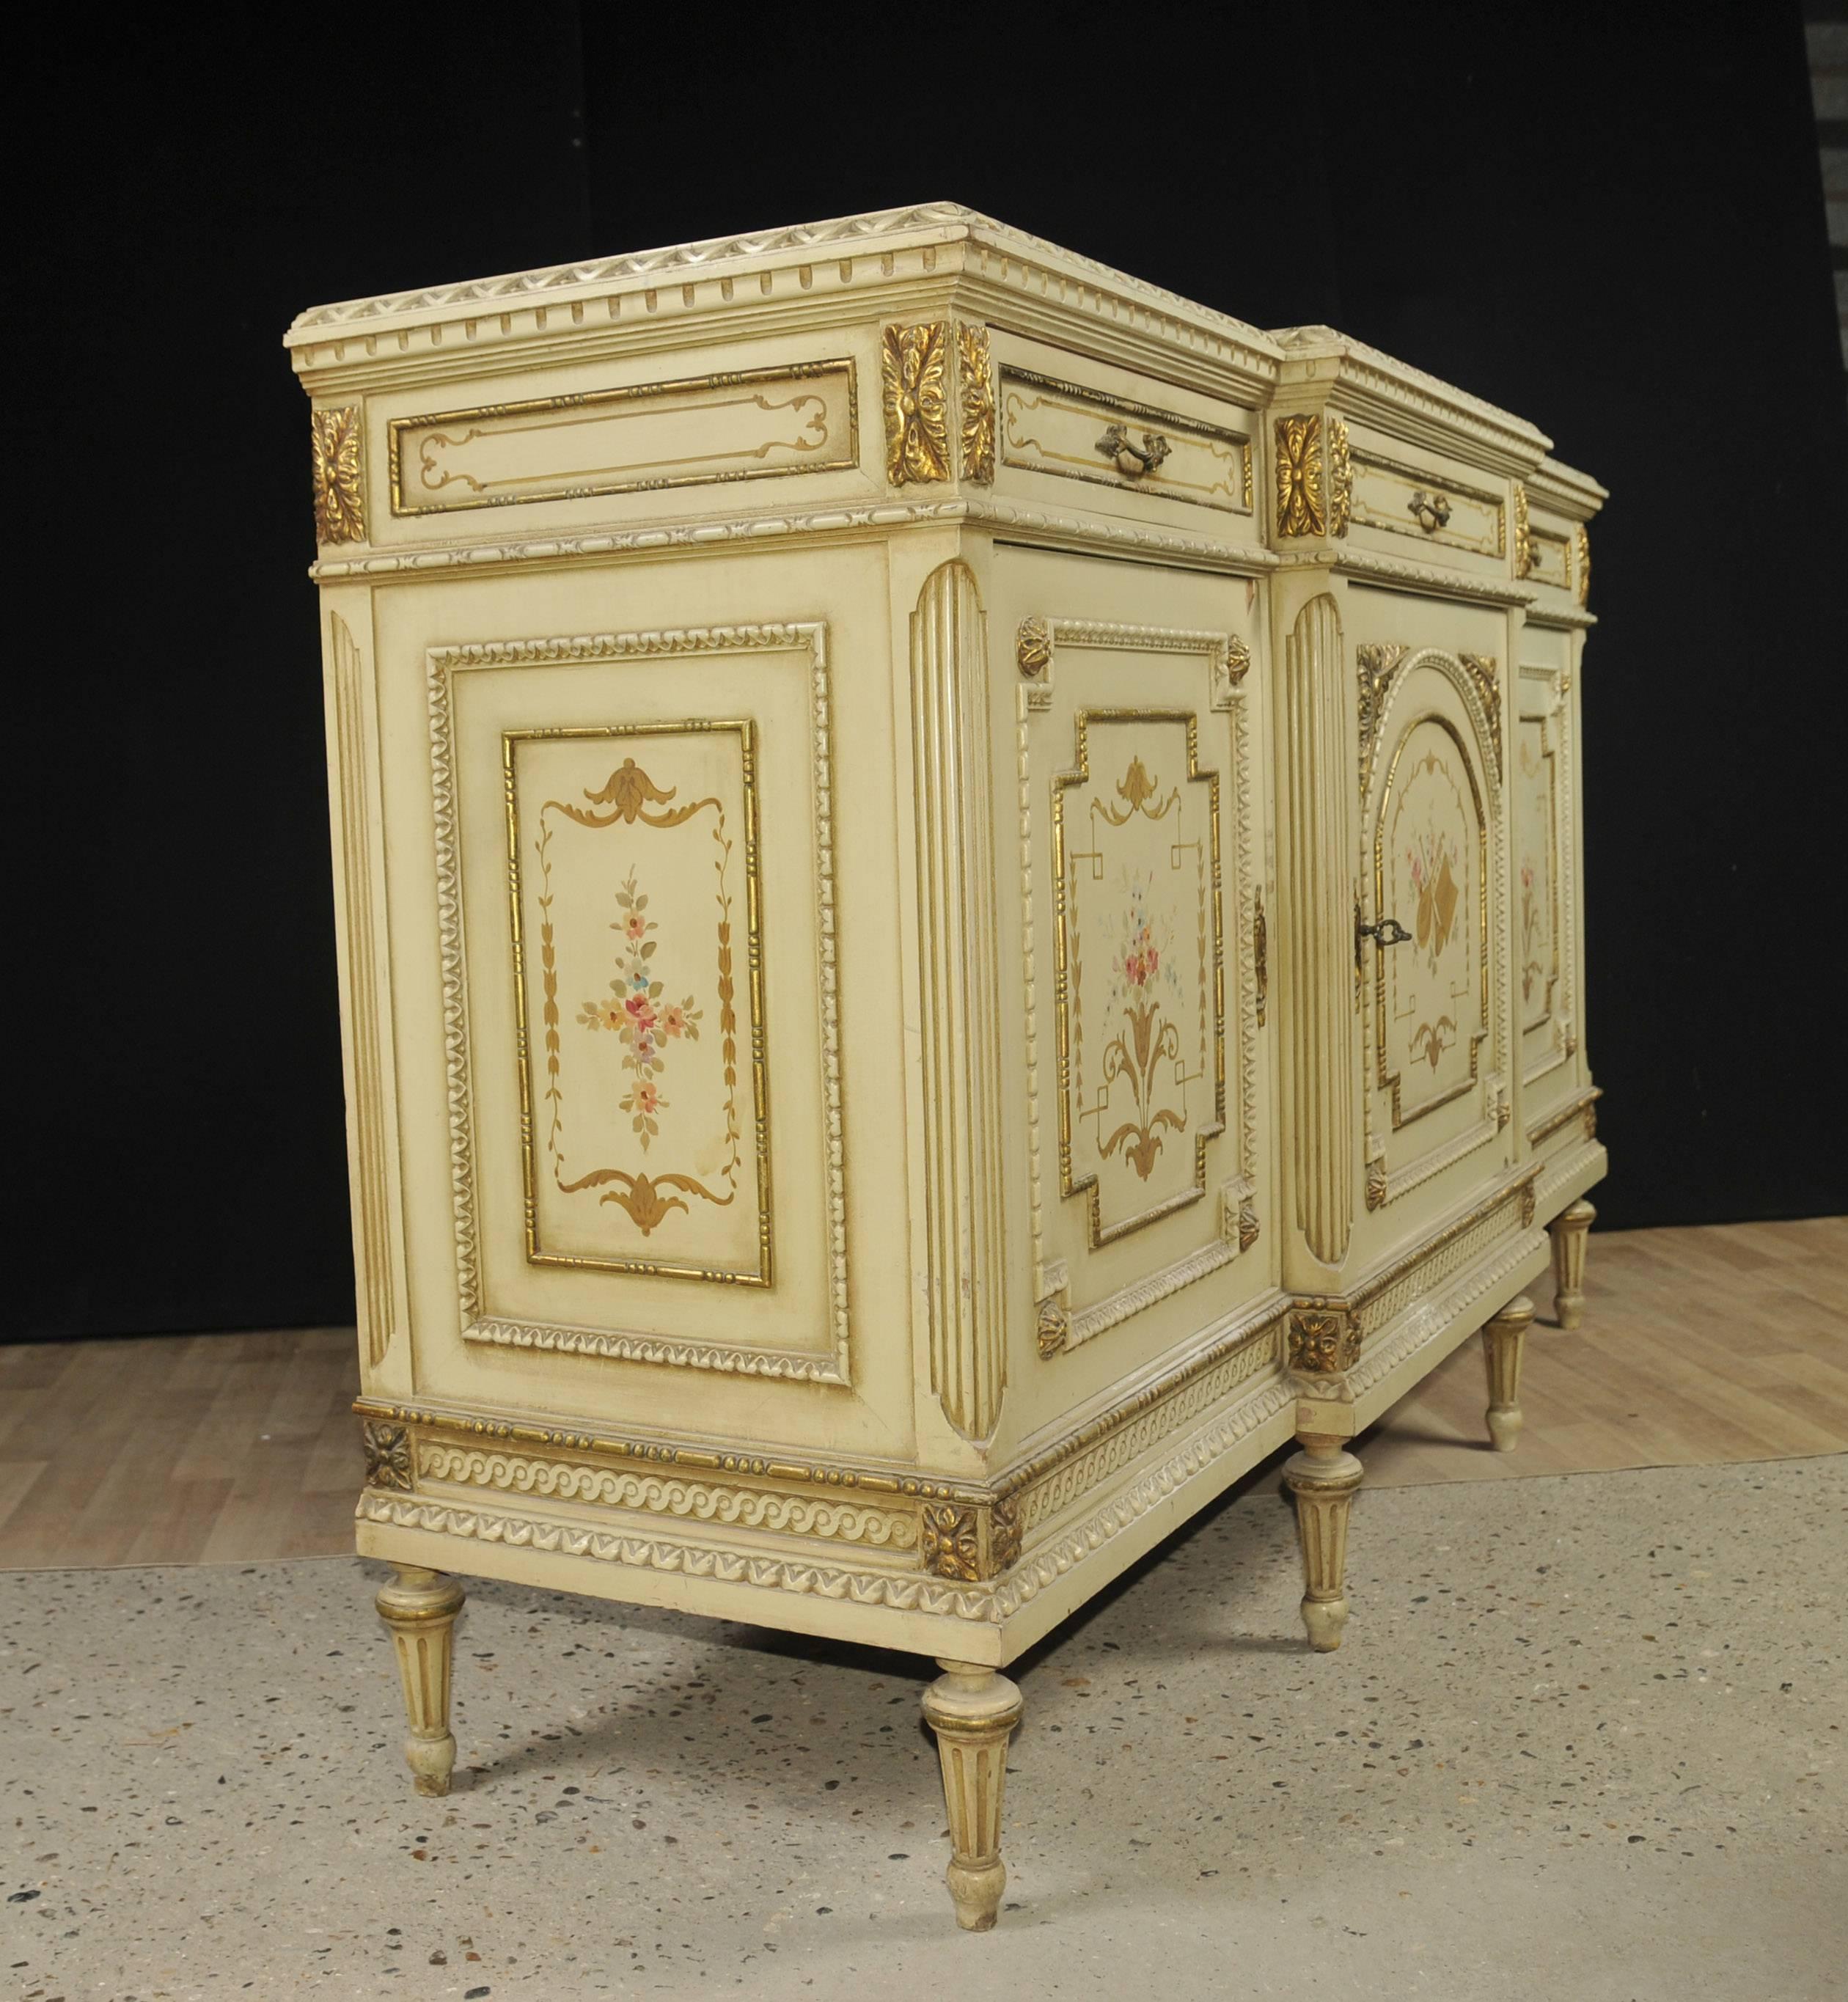 Gorgeous French neoclassical sideboard or cabinet.
Great look to this with painted finish in off-white cream.
This in turn has been pained on and the hand-painted details are very intricate including musical.

Instruments, classical garlands and